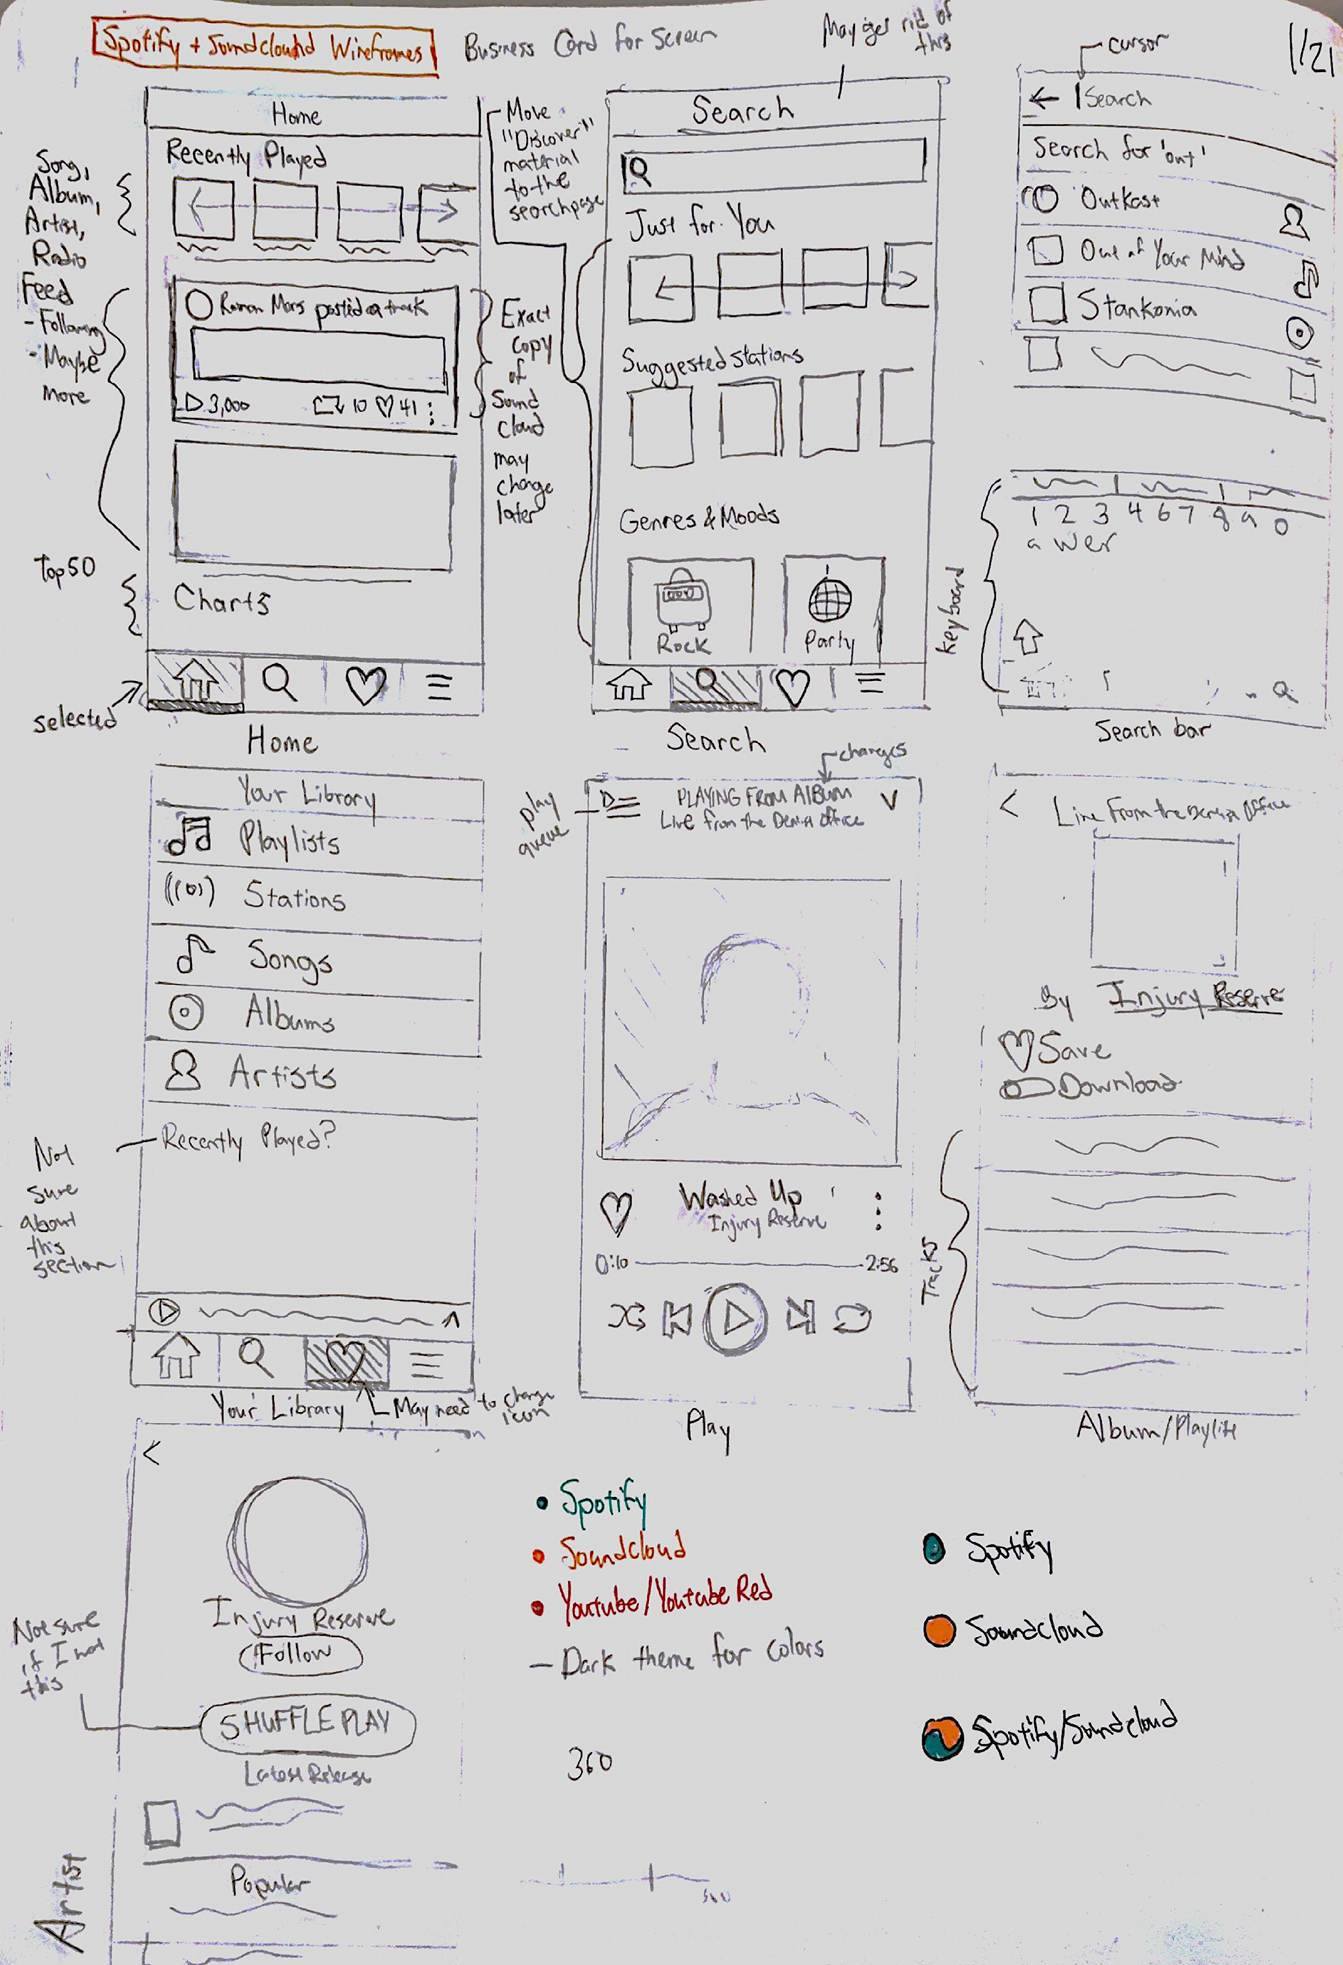 Initial Sketches of Muse Music Player